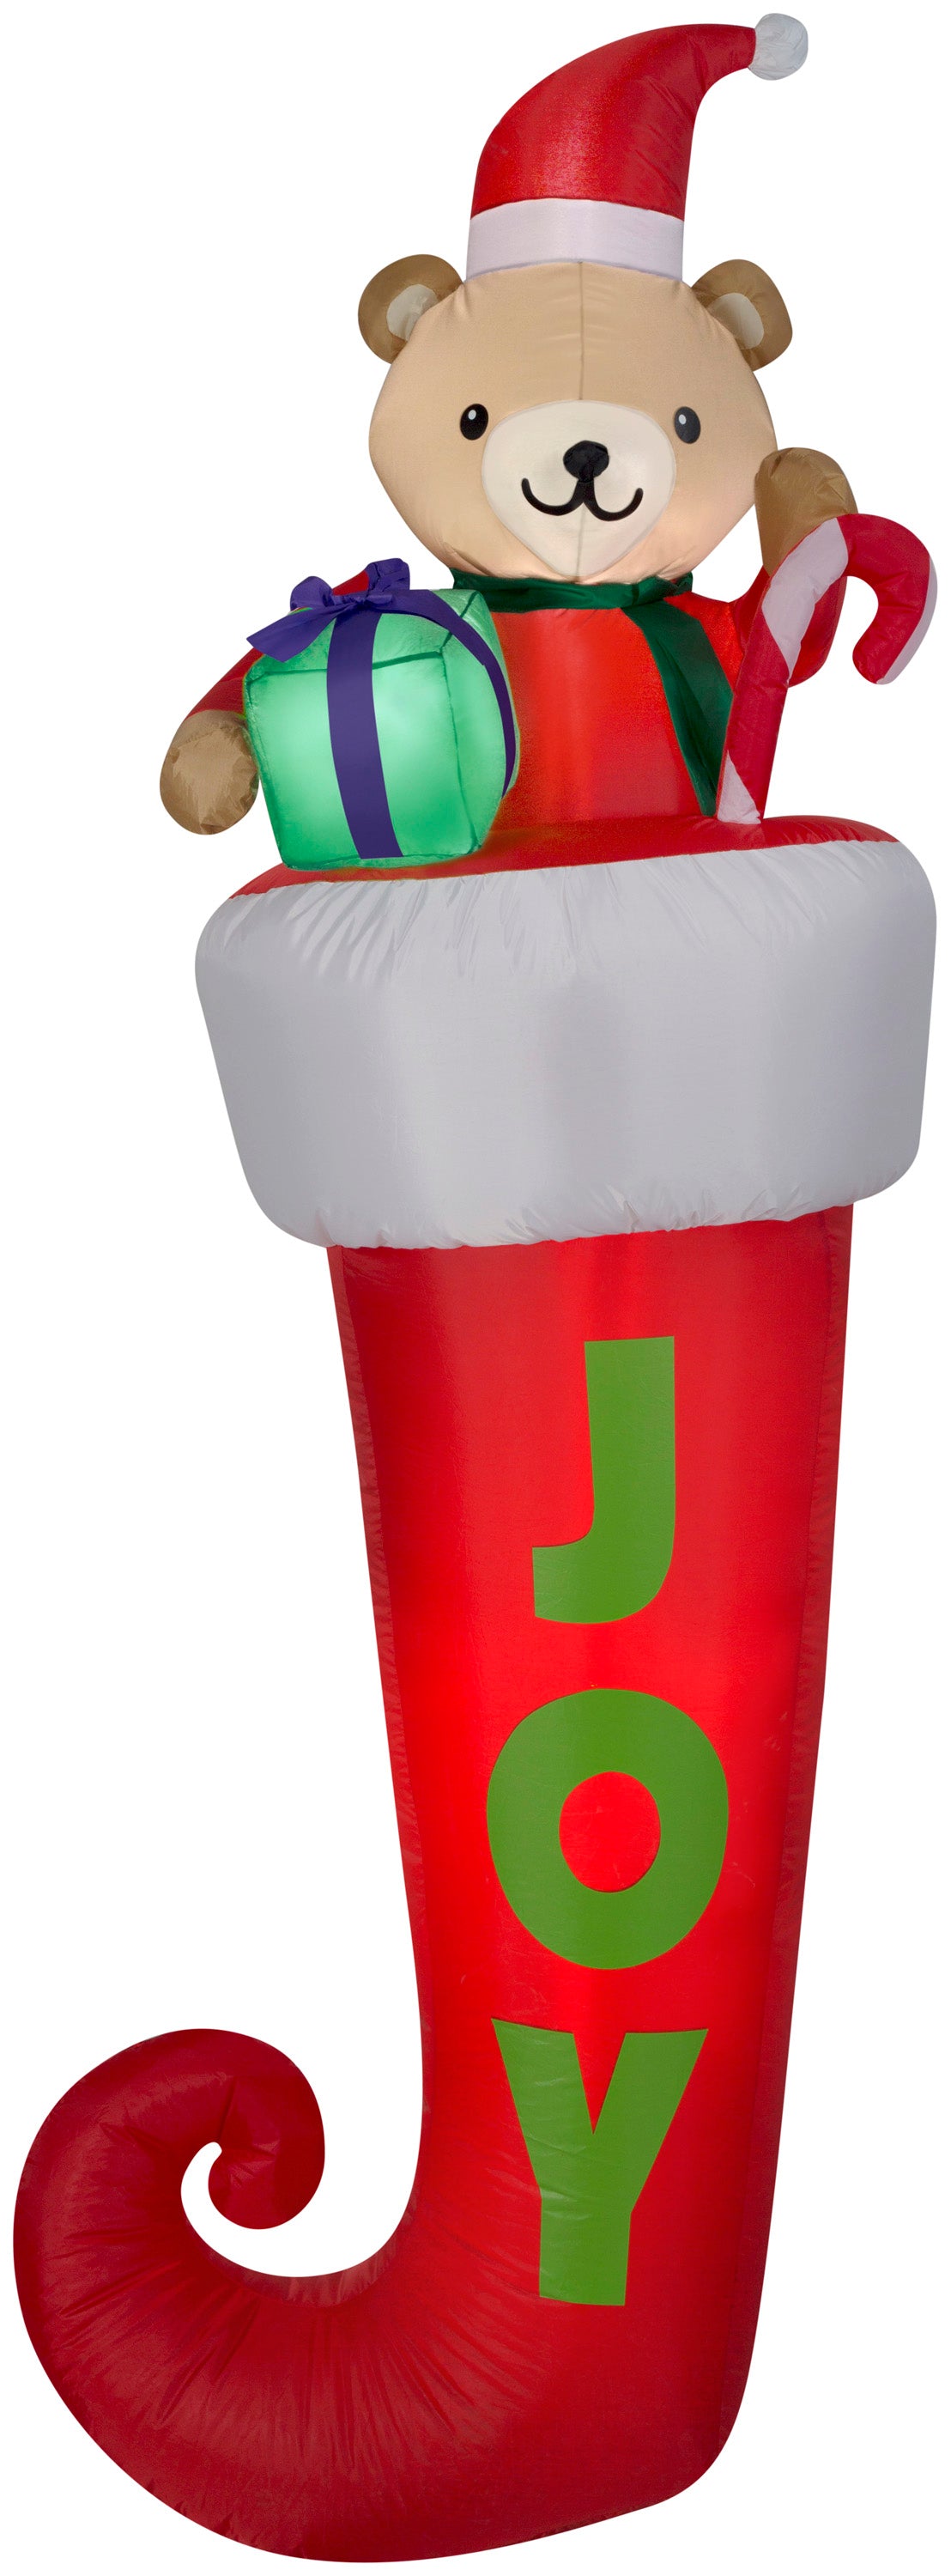 7' Airblown Stocking with Teddy Bear Christmas Inflatable